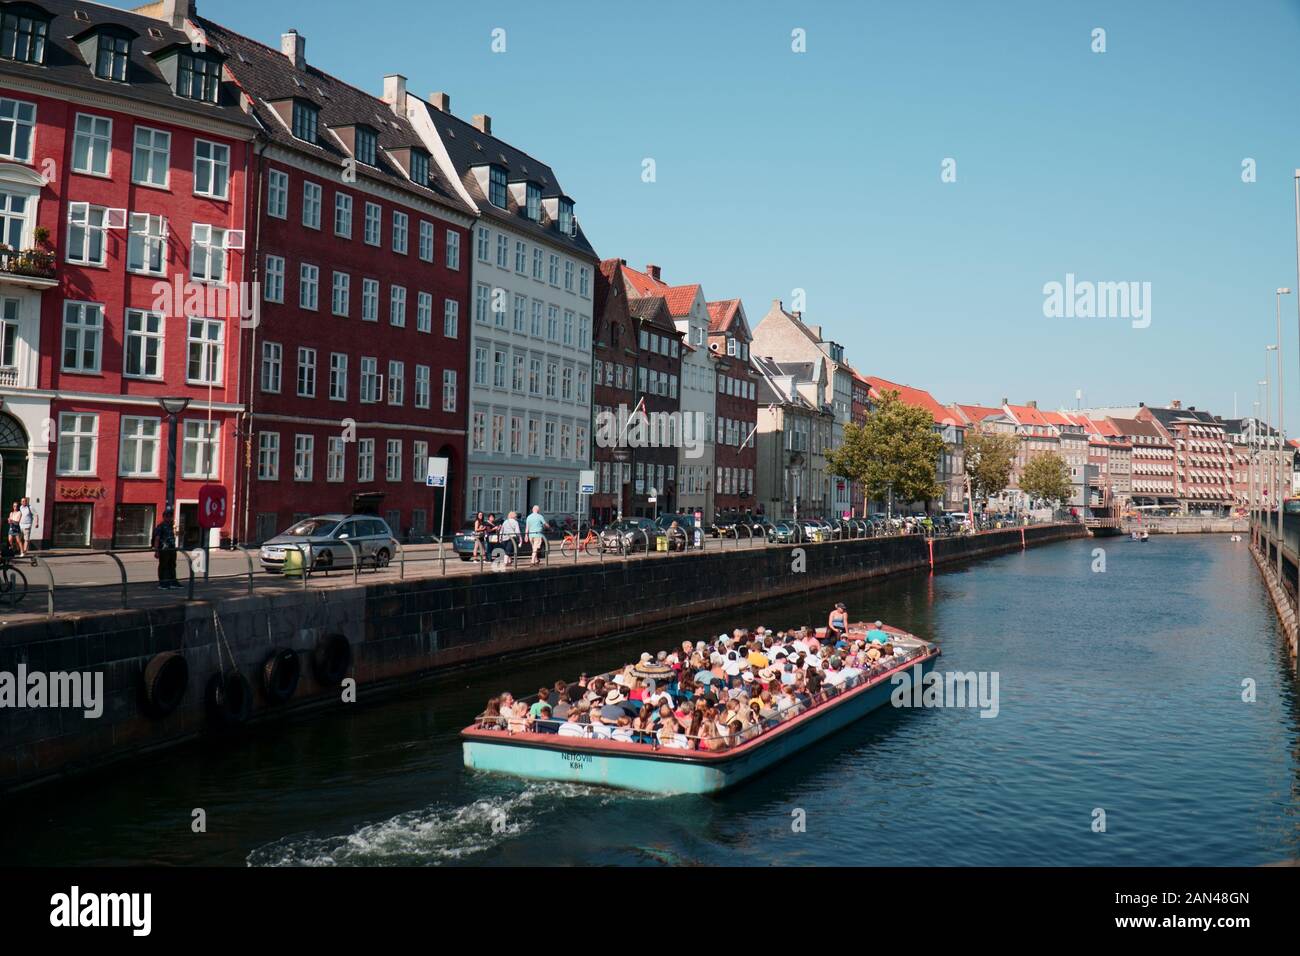 Tourists on a boat tour around the canals of Copenhagen, Denmark Stock Photo